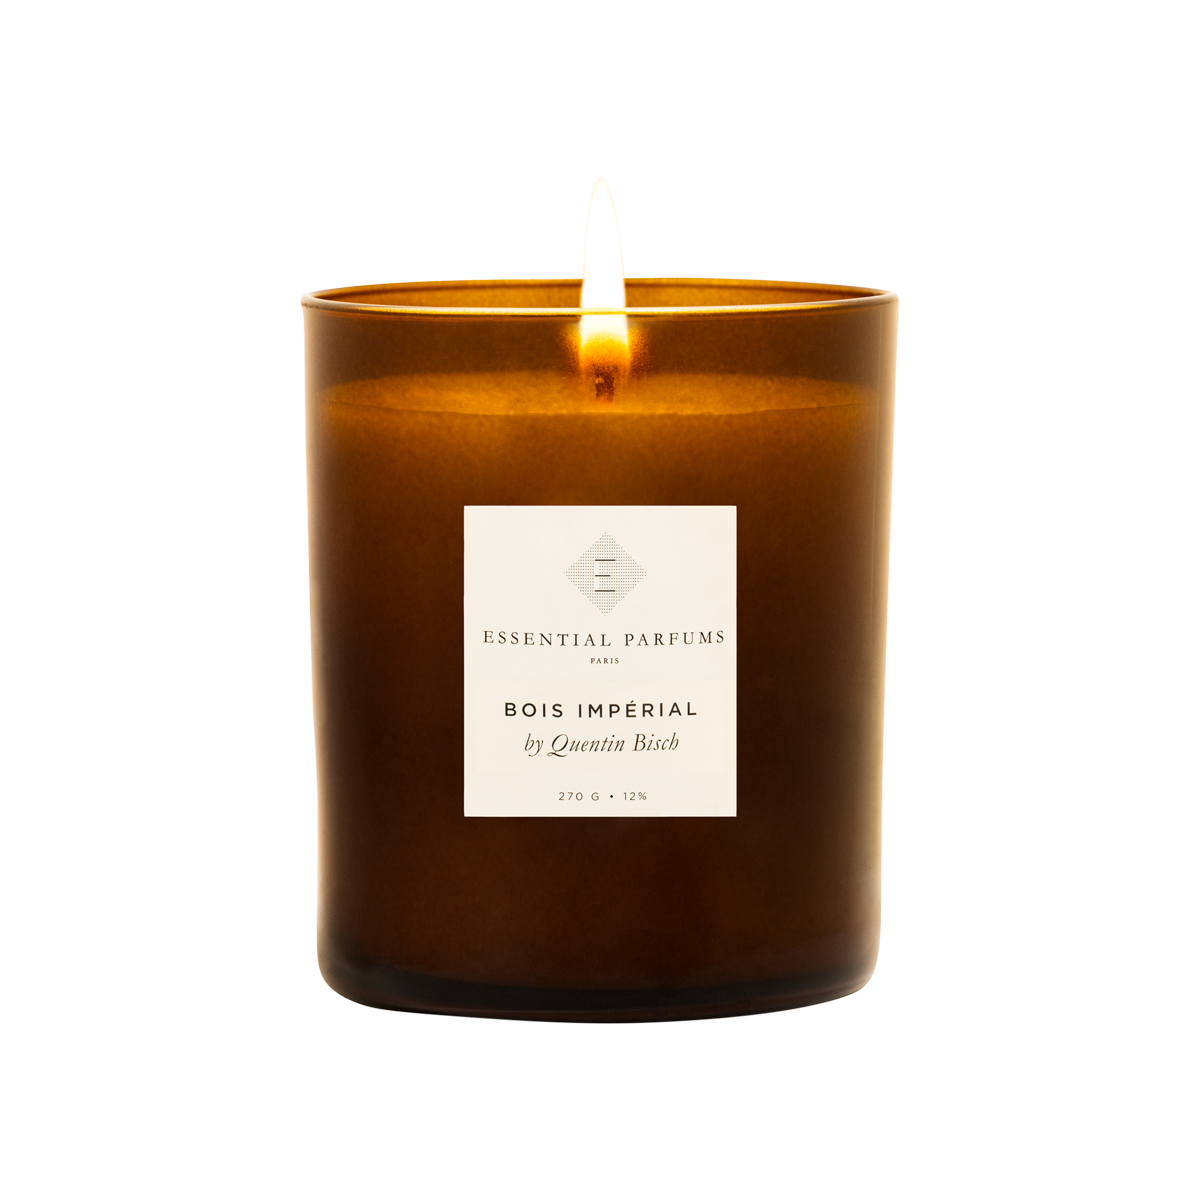 Essential Parfums - Bois Imperial Candle